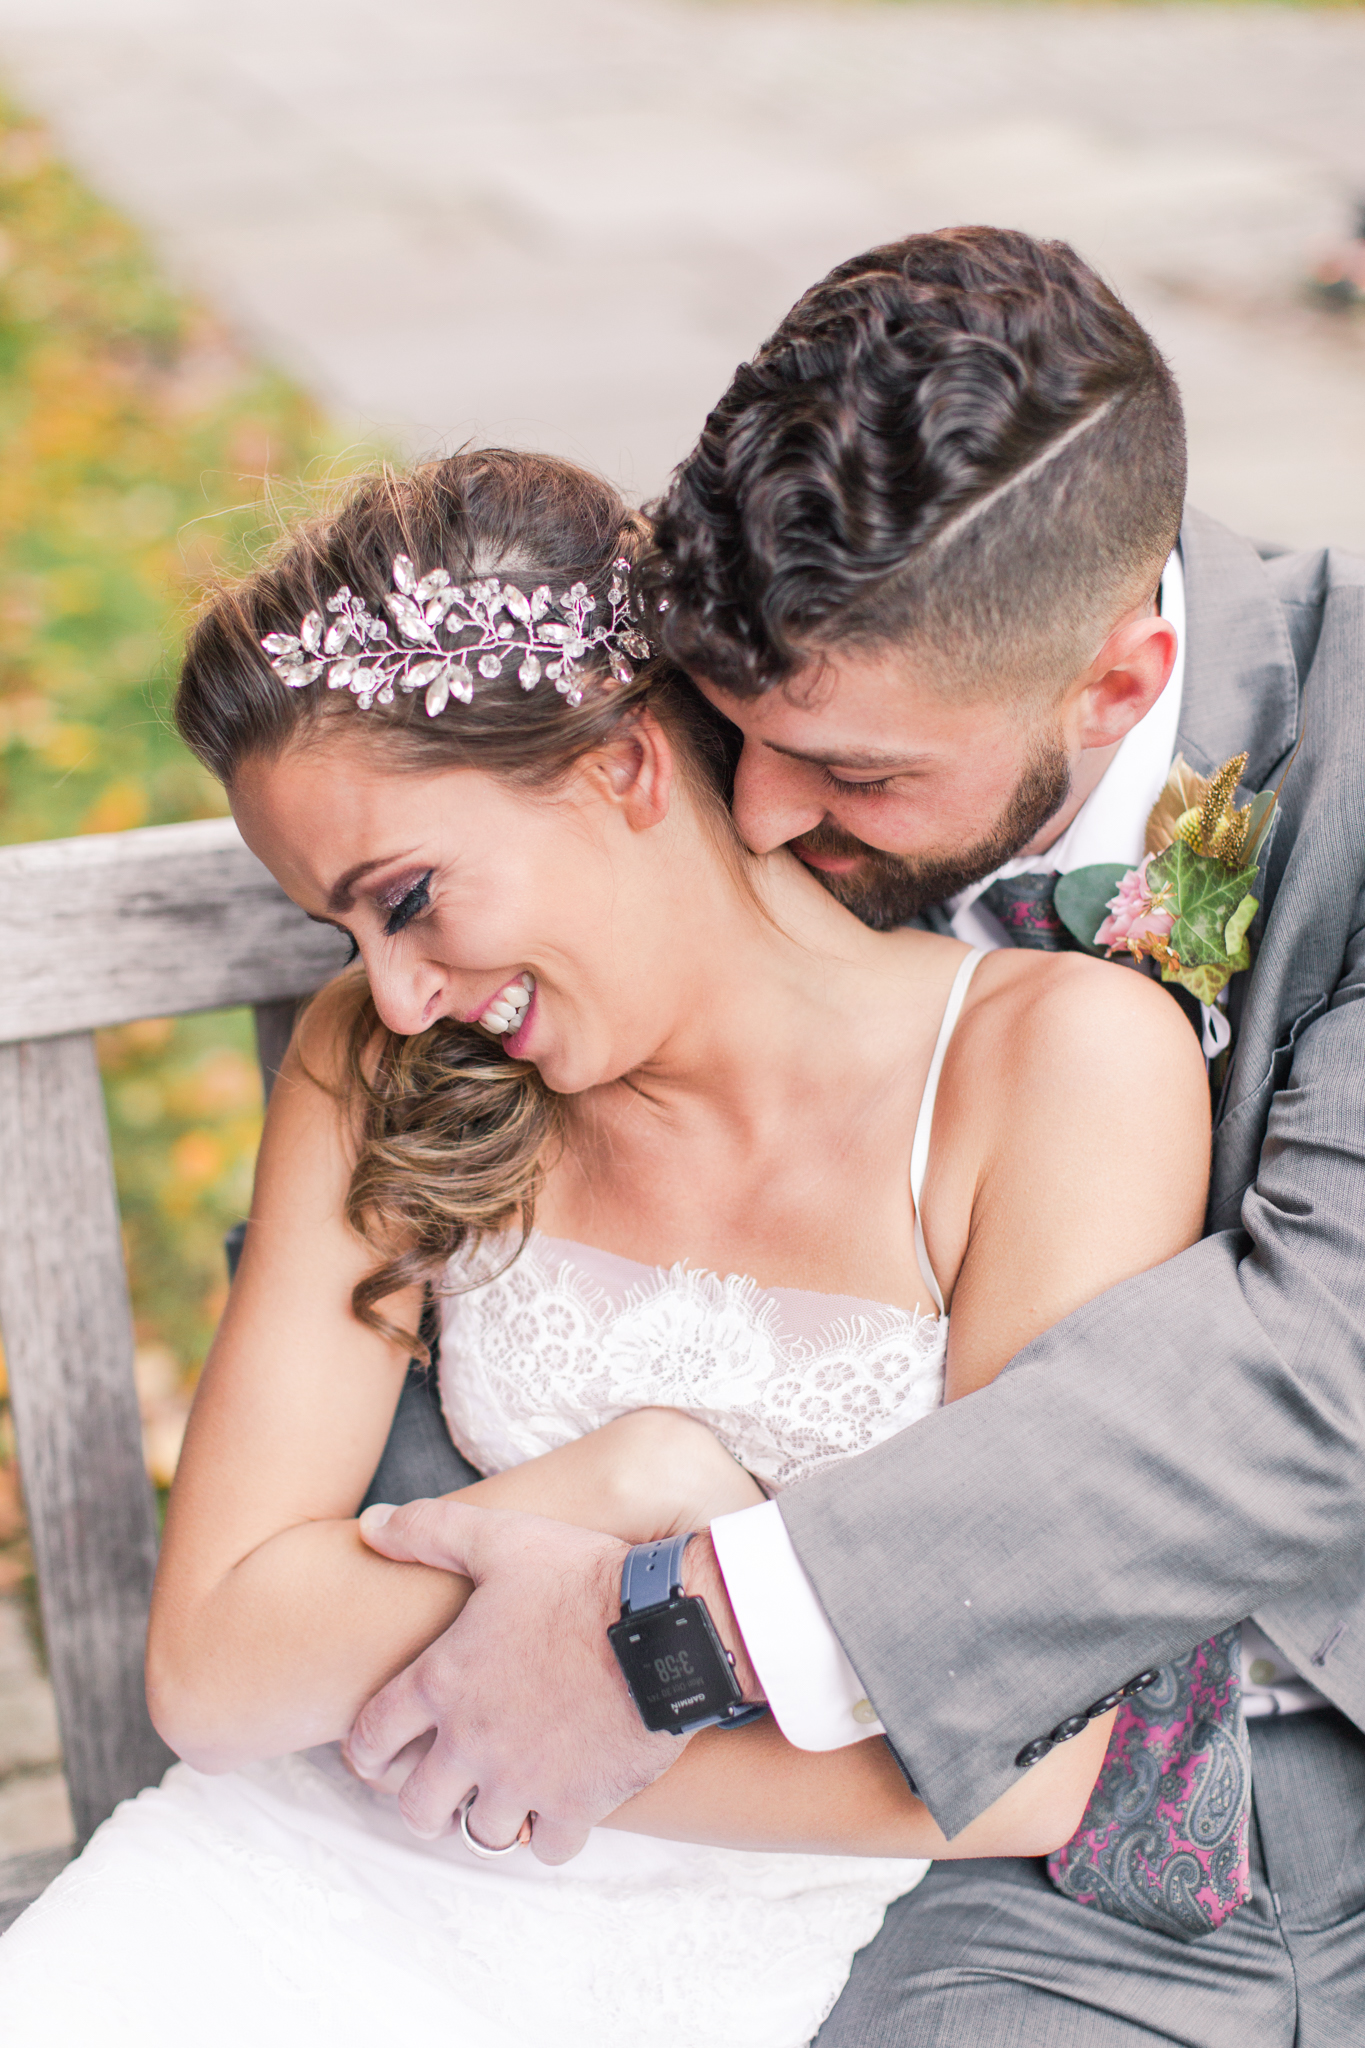 cute bride and groom photos of snuggle time! So cute. Pearl Weddings and Events